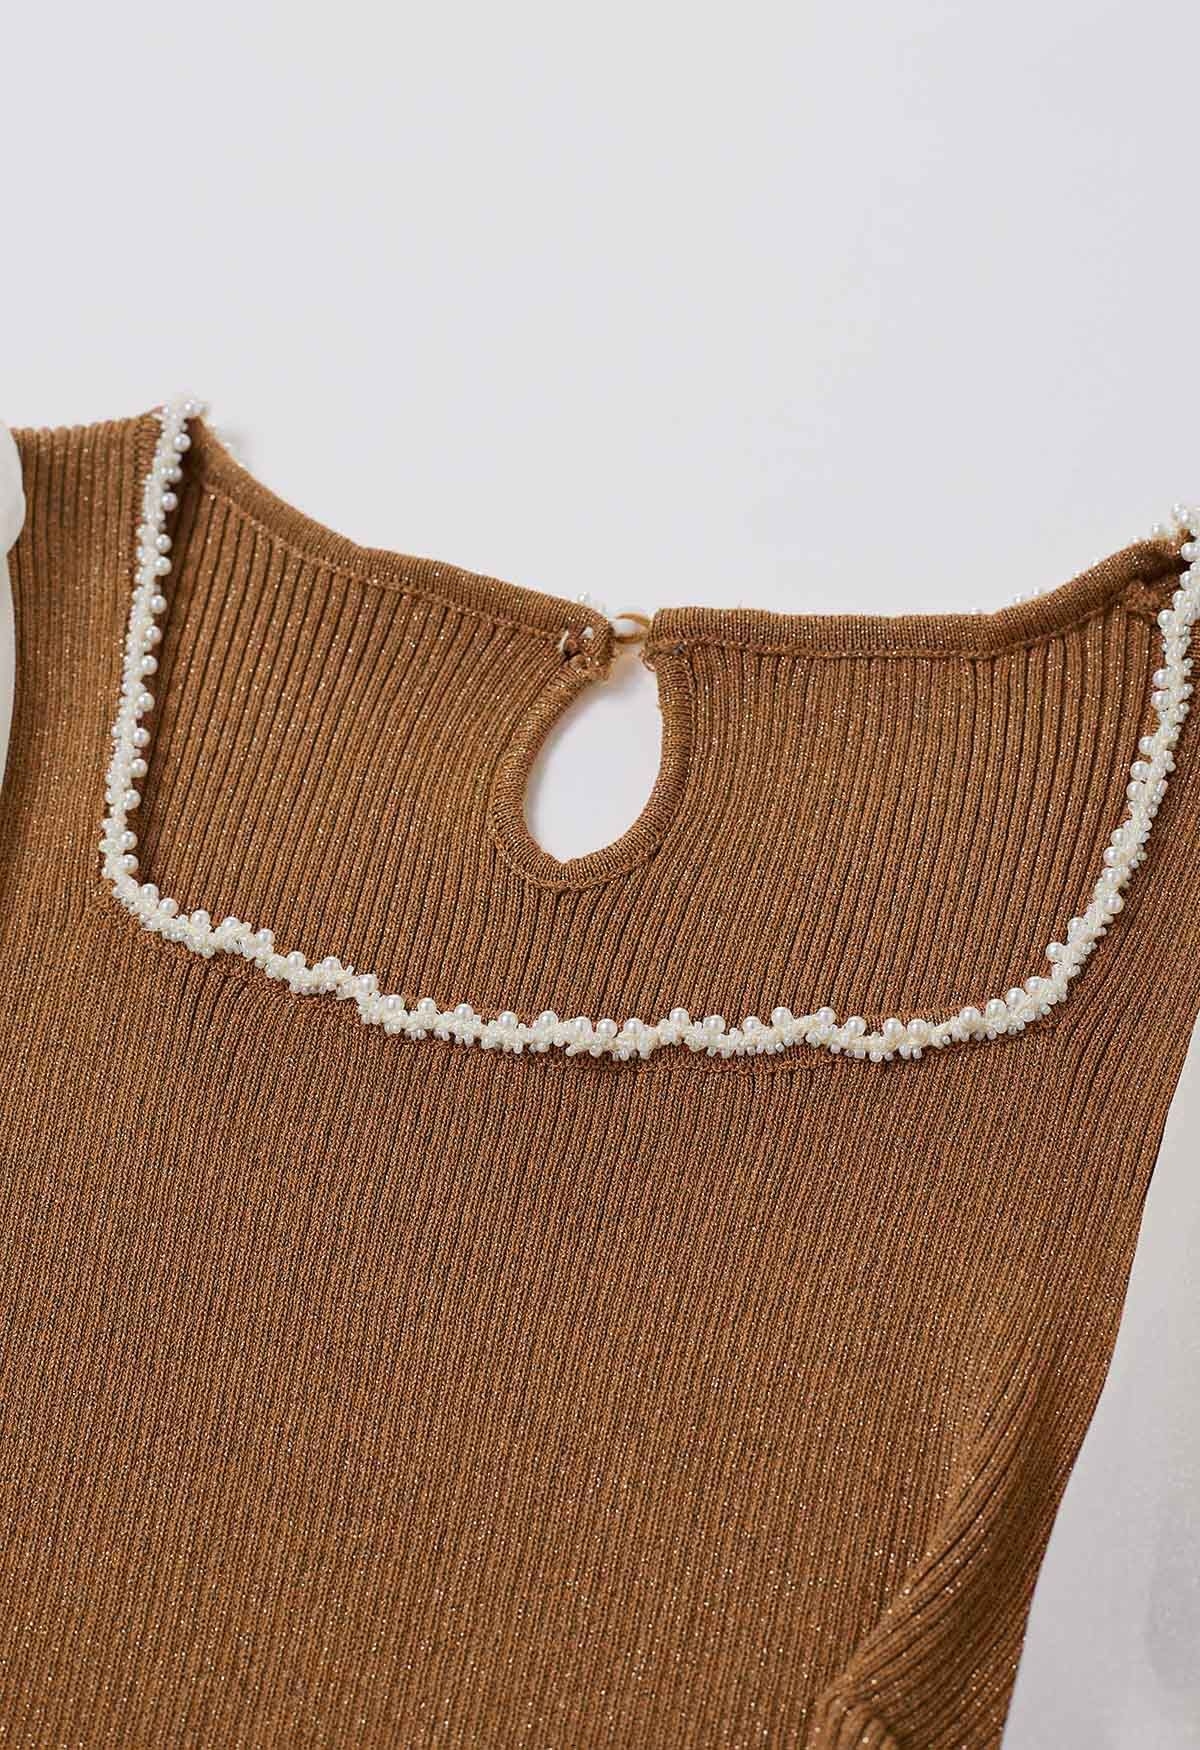 Beaded Square Neck Spliced Puff Sleeve Knit Top in Caramel